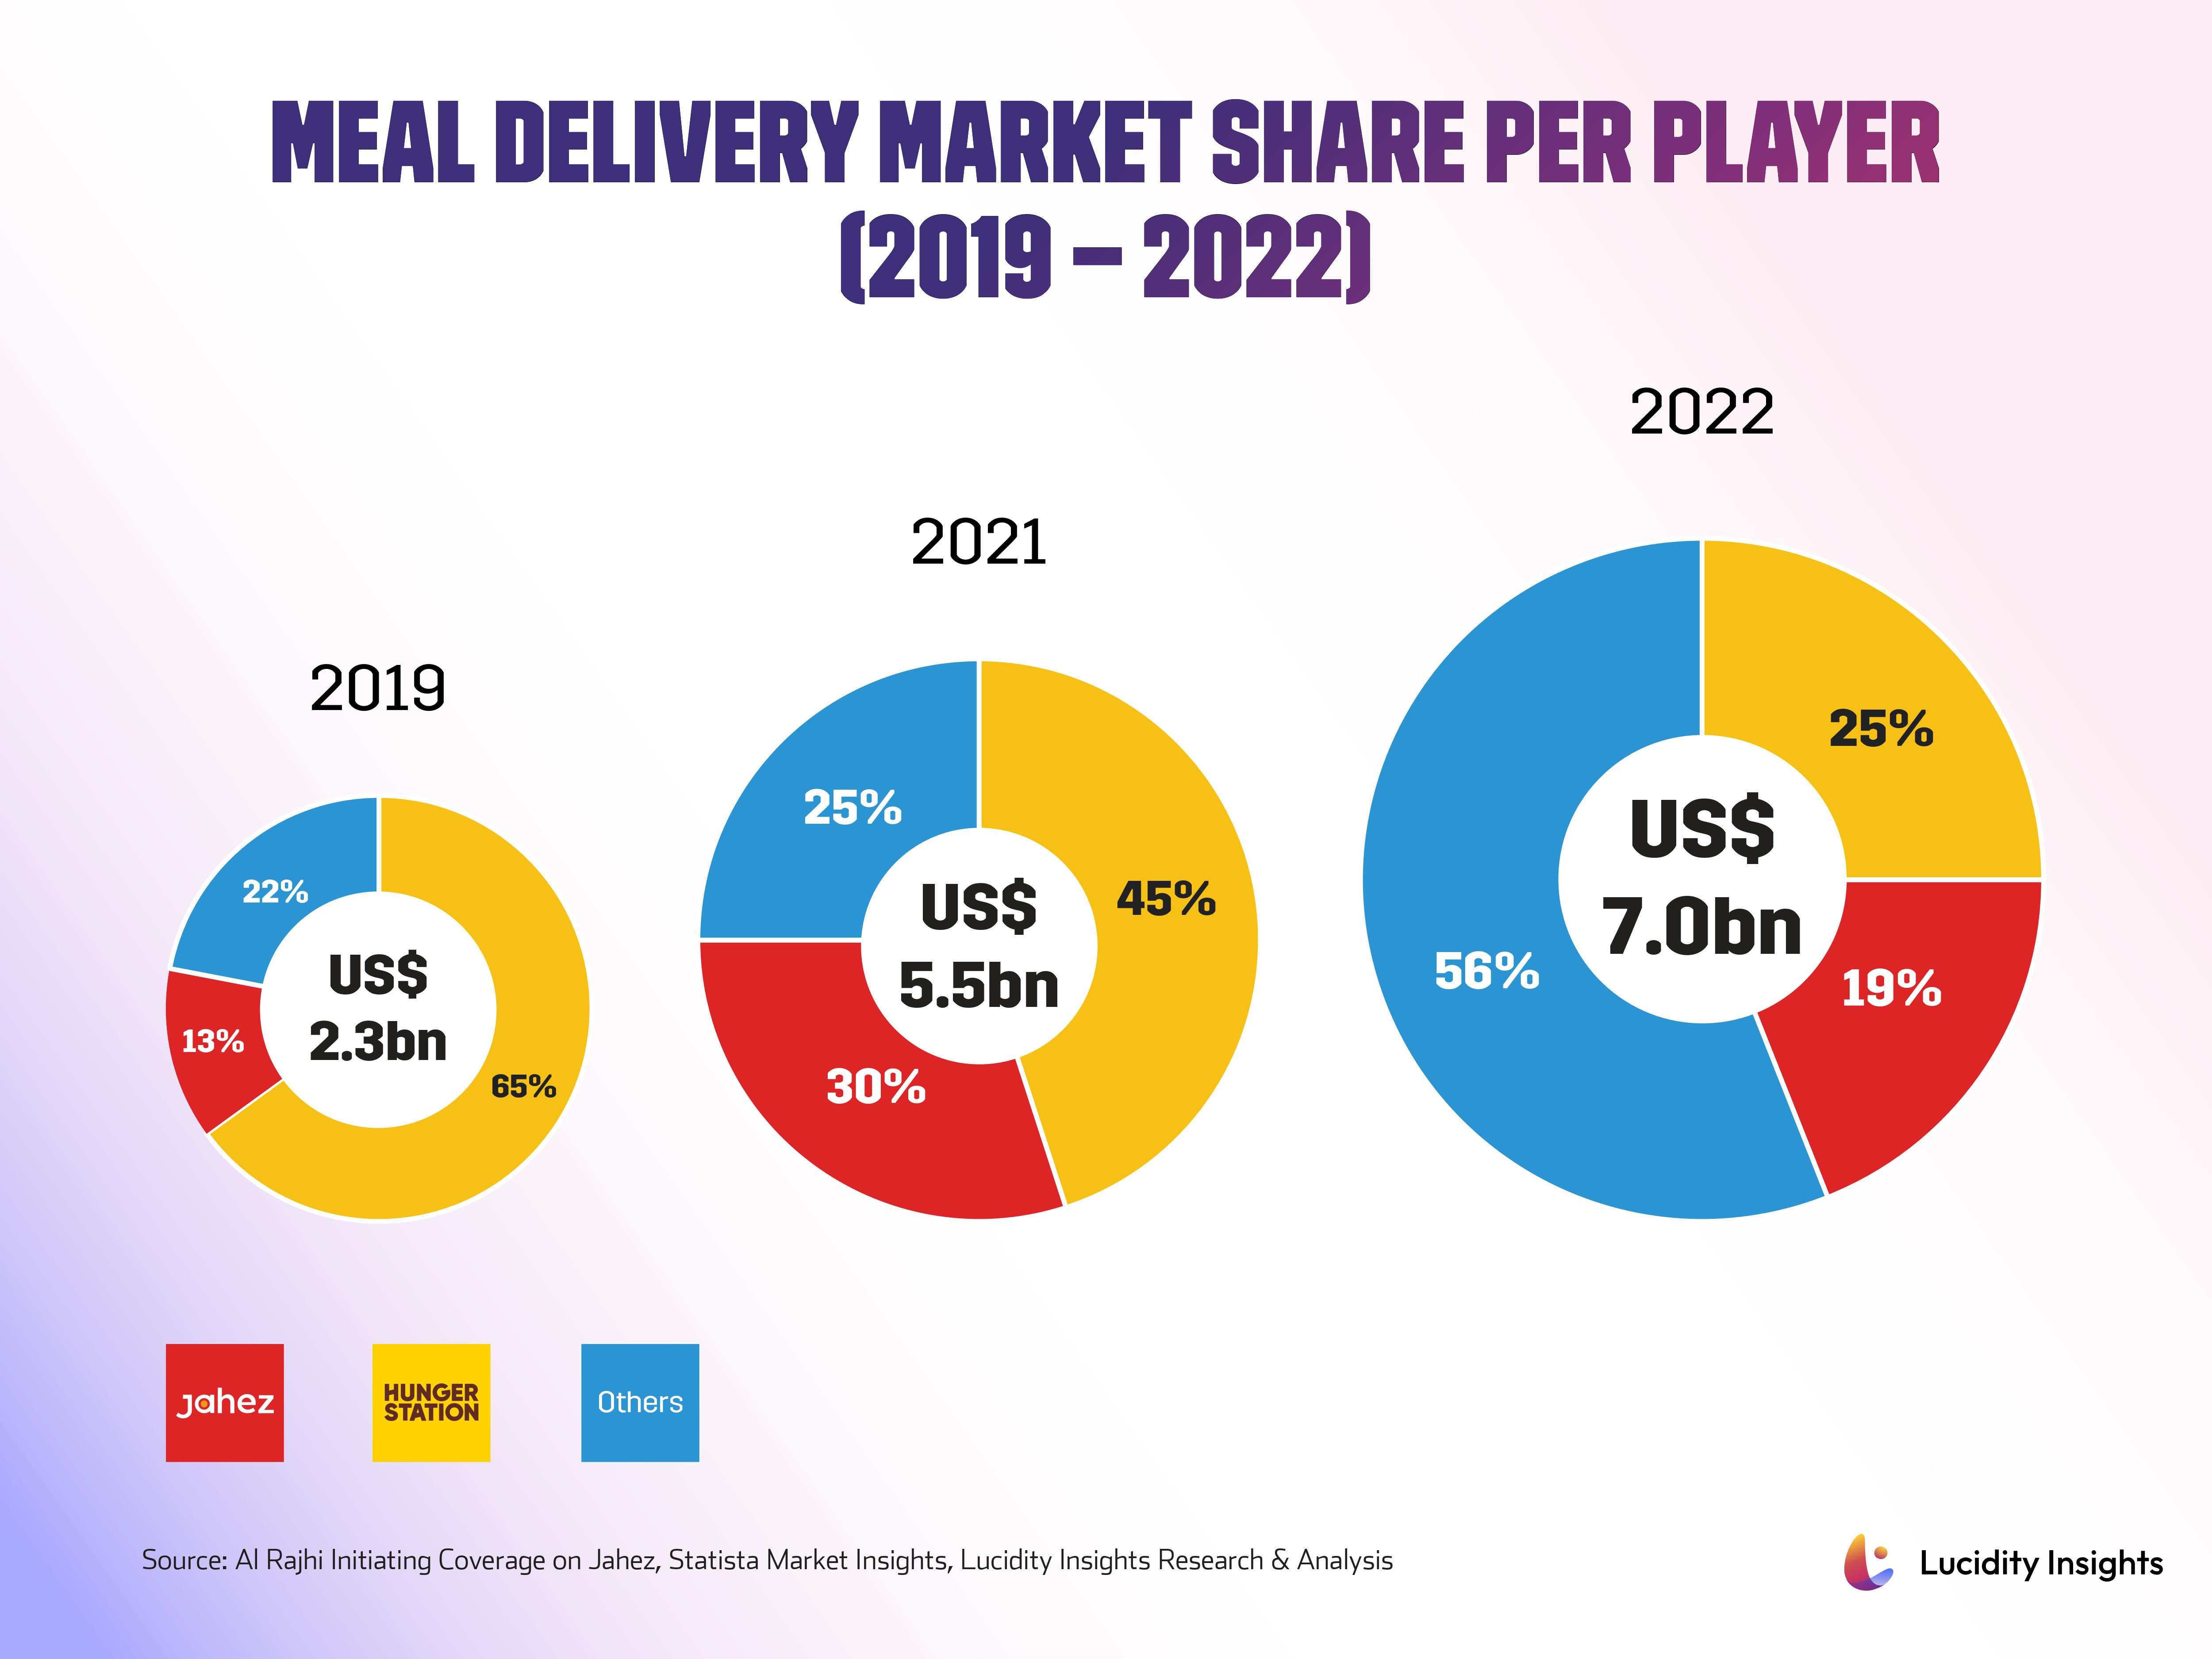 Meal Delivery Market Share Per Player (2019-2022)